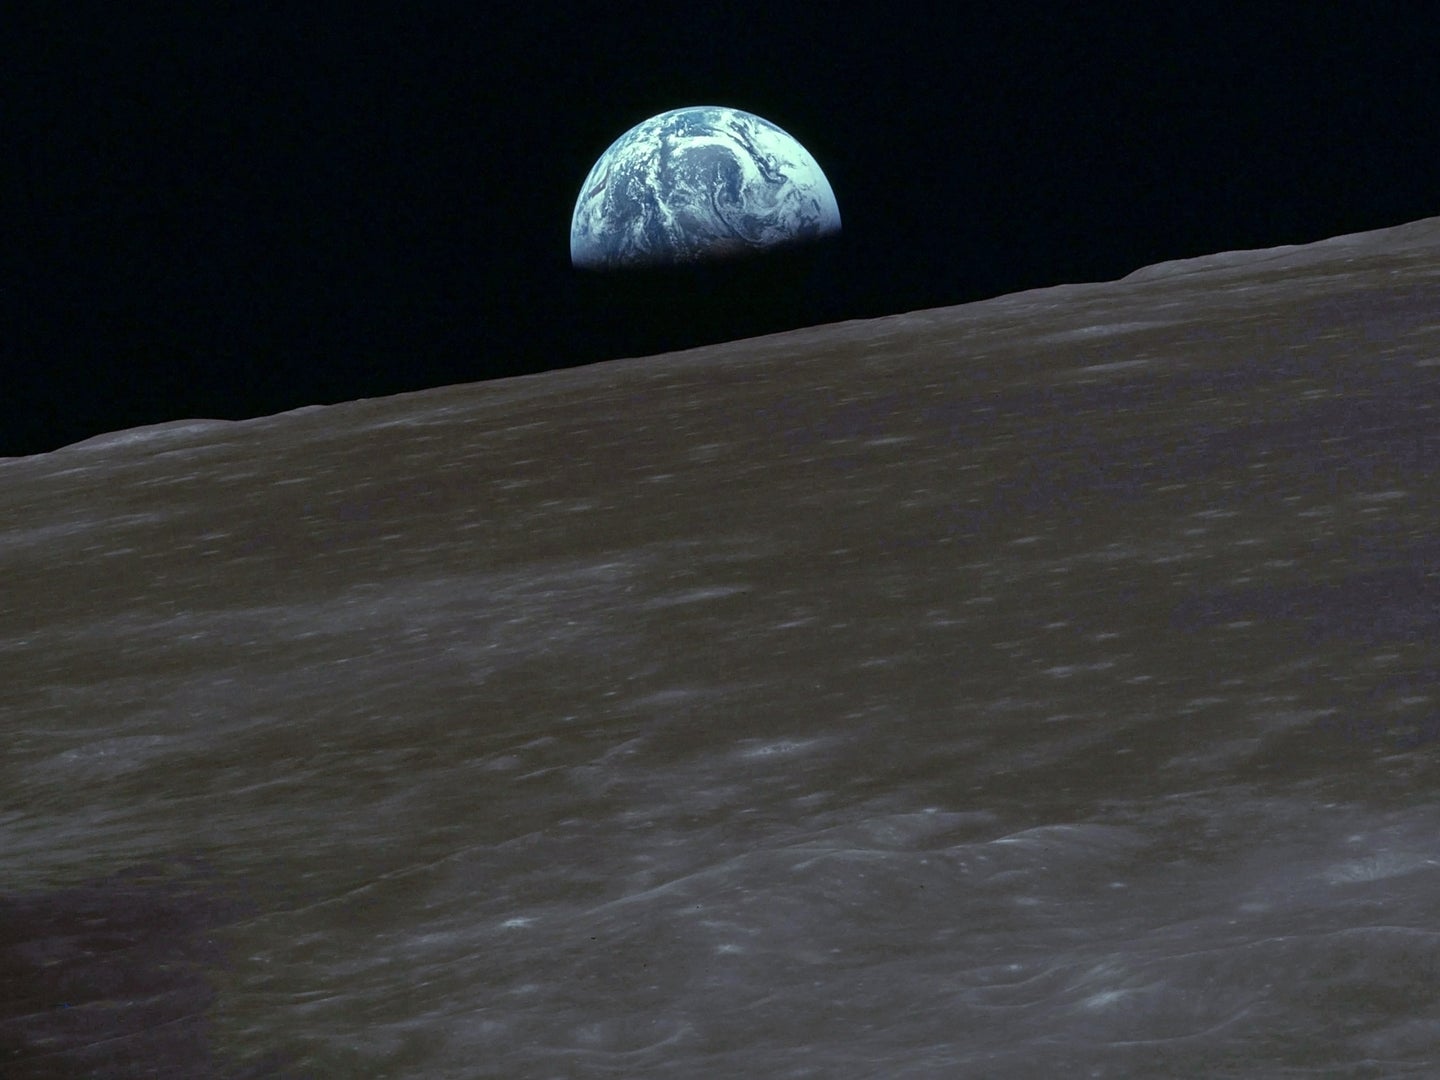 Earth rising over the moon during an Apollo mission